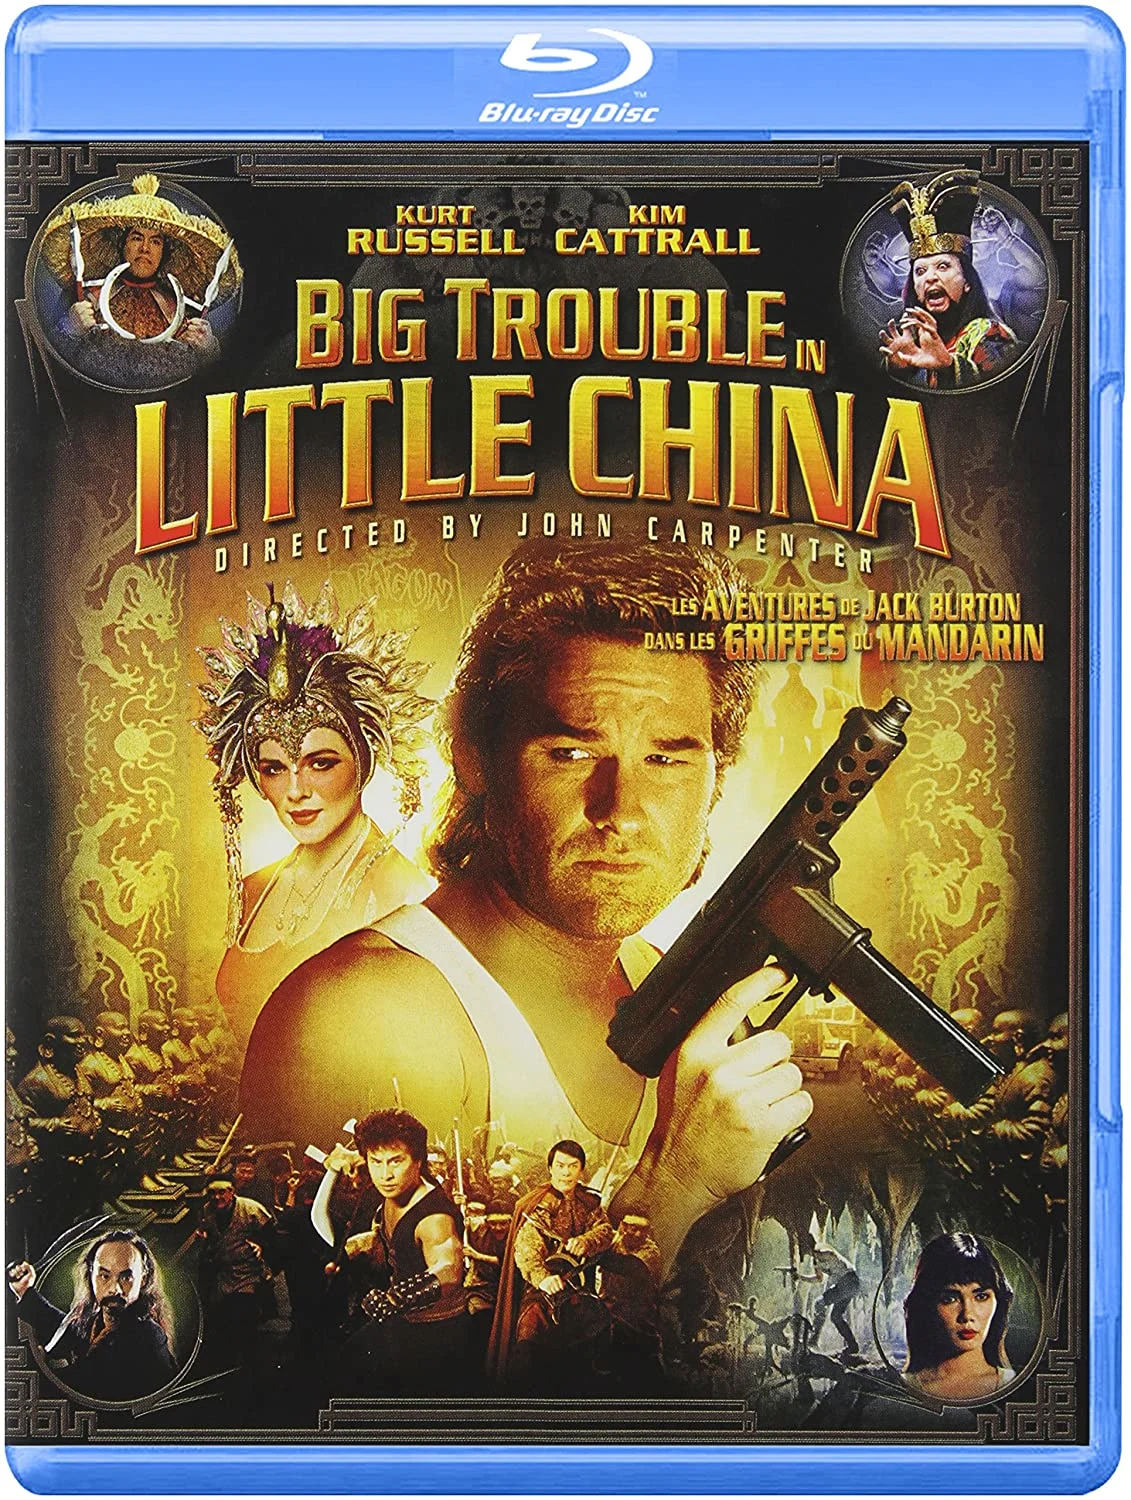 Big Trouble In Little China (Blu-ray) on MovieShack